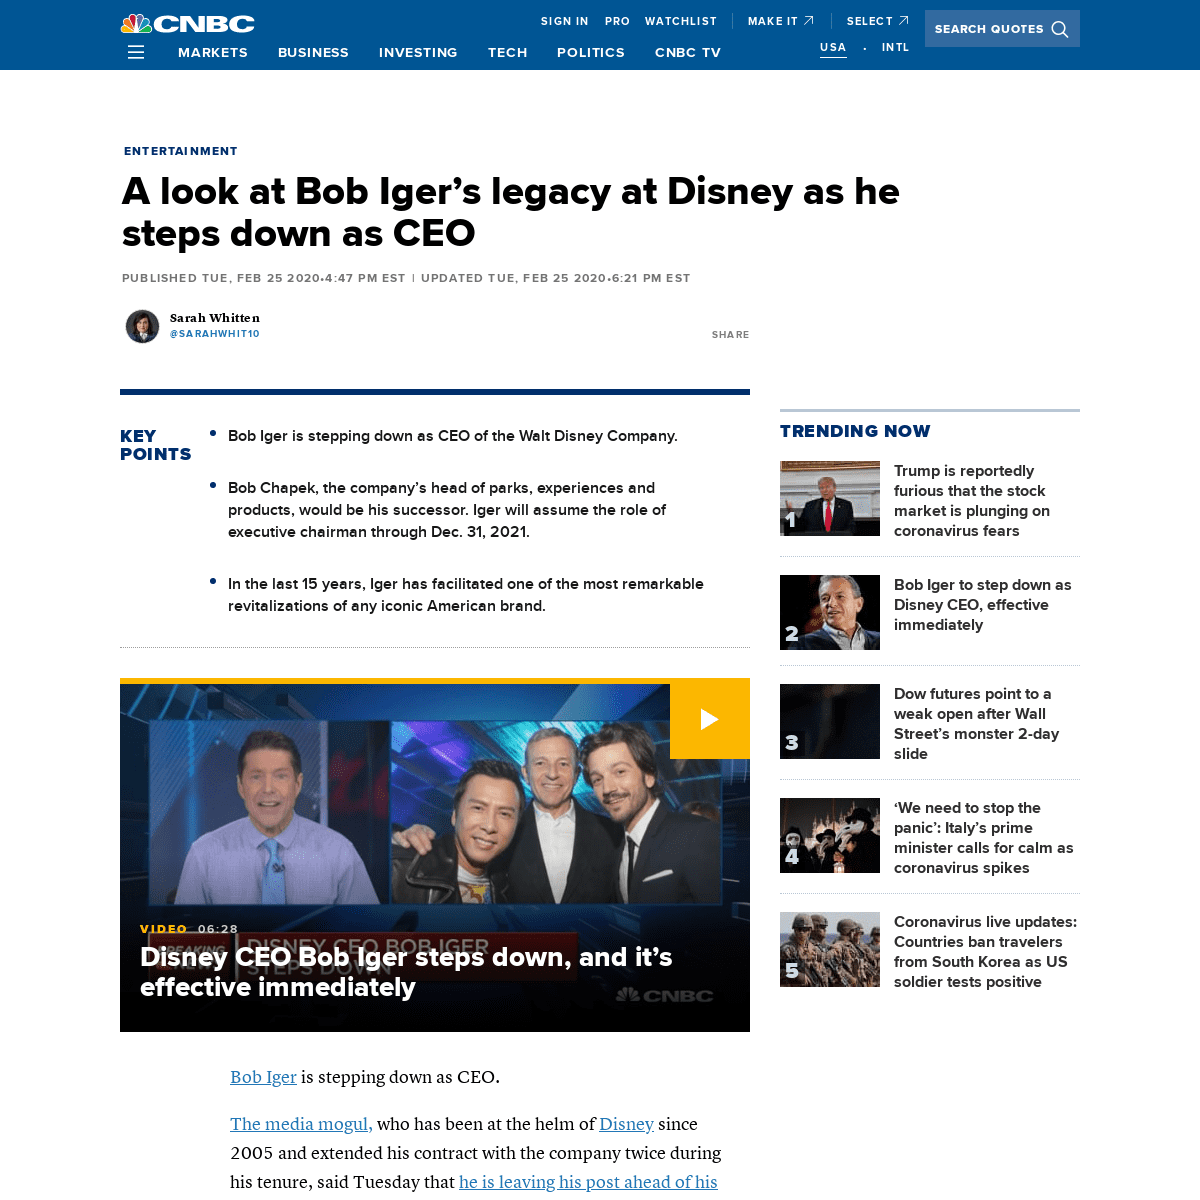 A complete backup of www.cnbc.com/2020/02/25/disney-ceo-bob-iger-steps-down-a-look-at-his-legacy.html